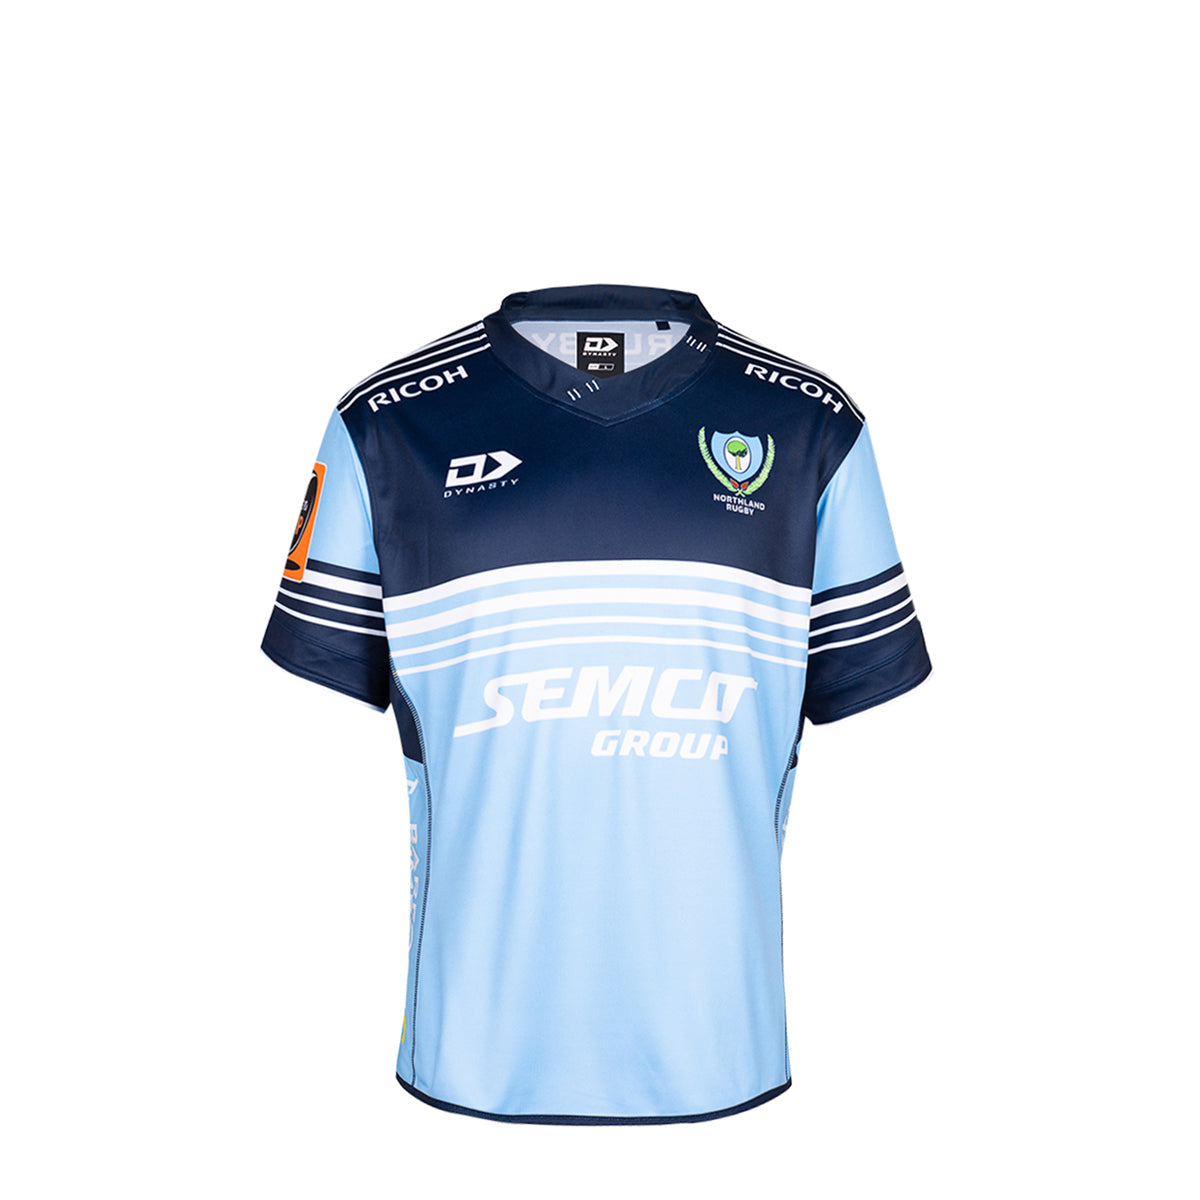 2020 Northland Rugby Junior Mitre 10 Cup Jersey